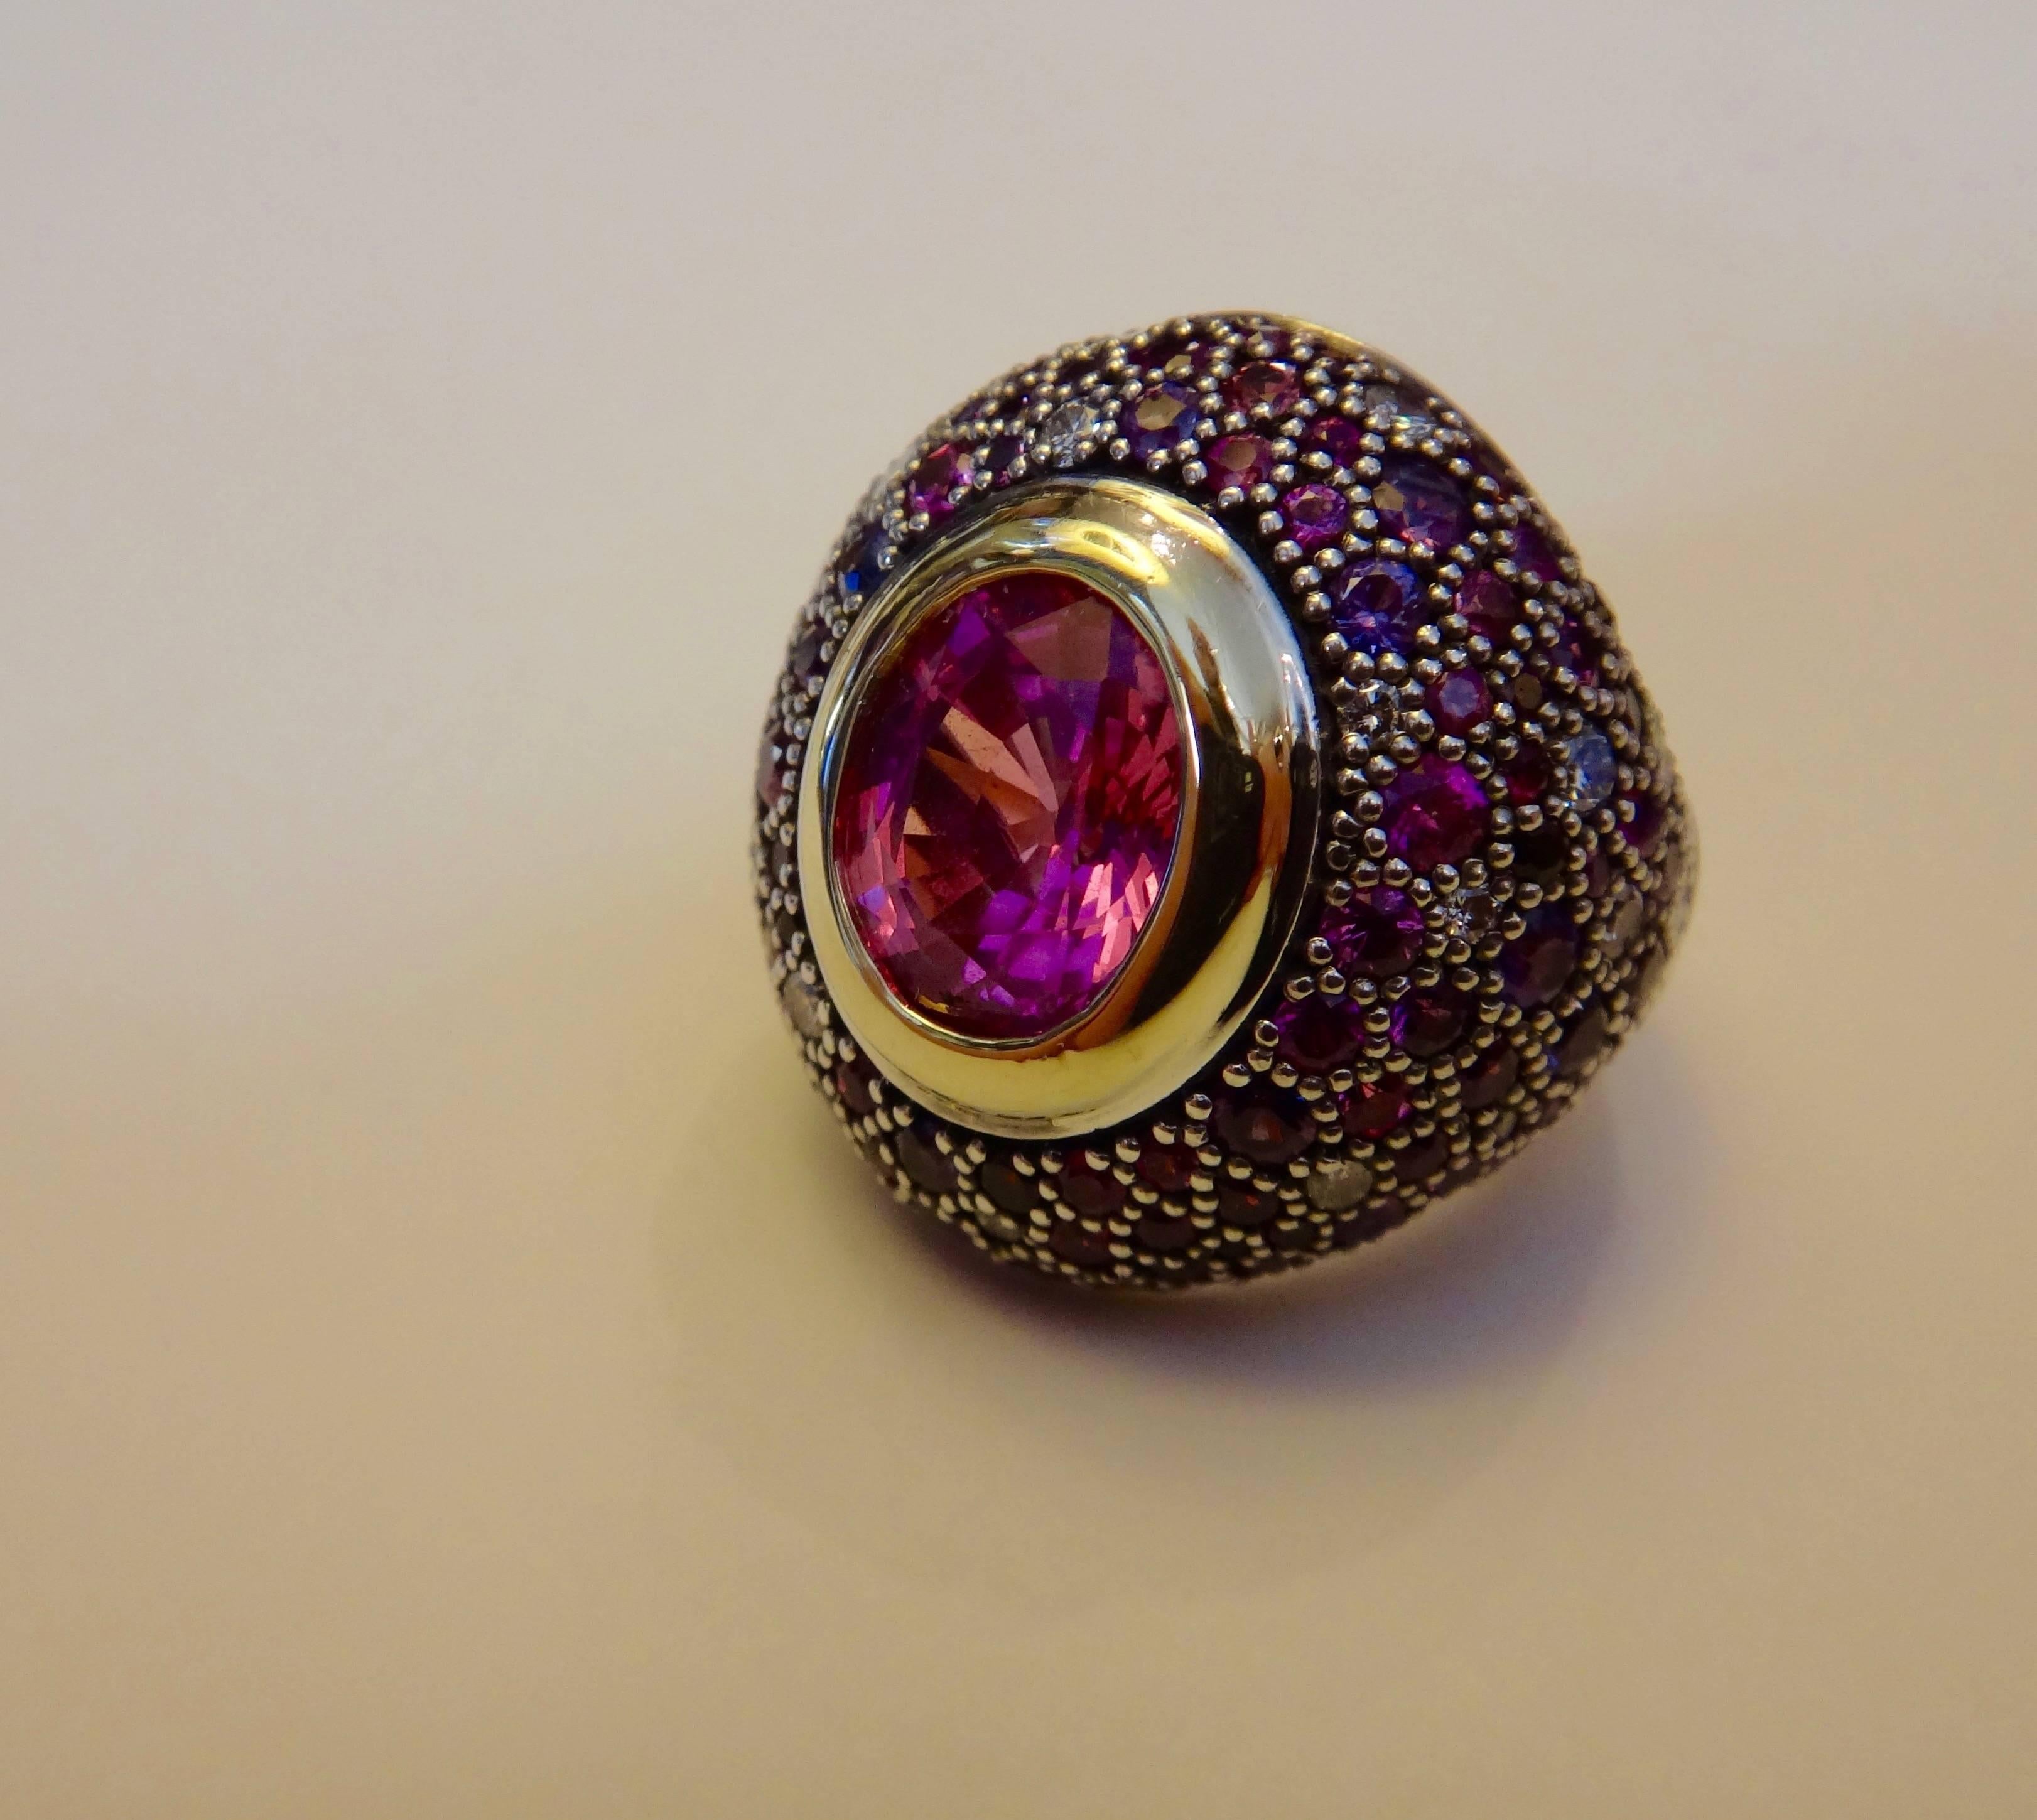 A large and exceptionally well cut oval shaped African pink sapphire is featured in this impressive dome ring.  The 